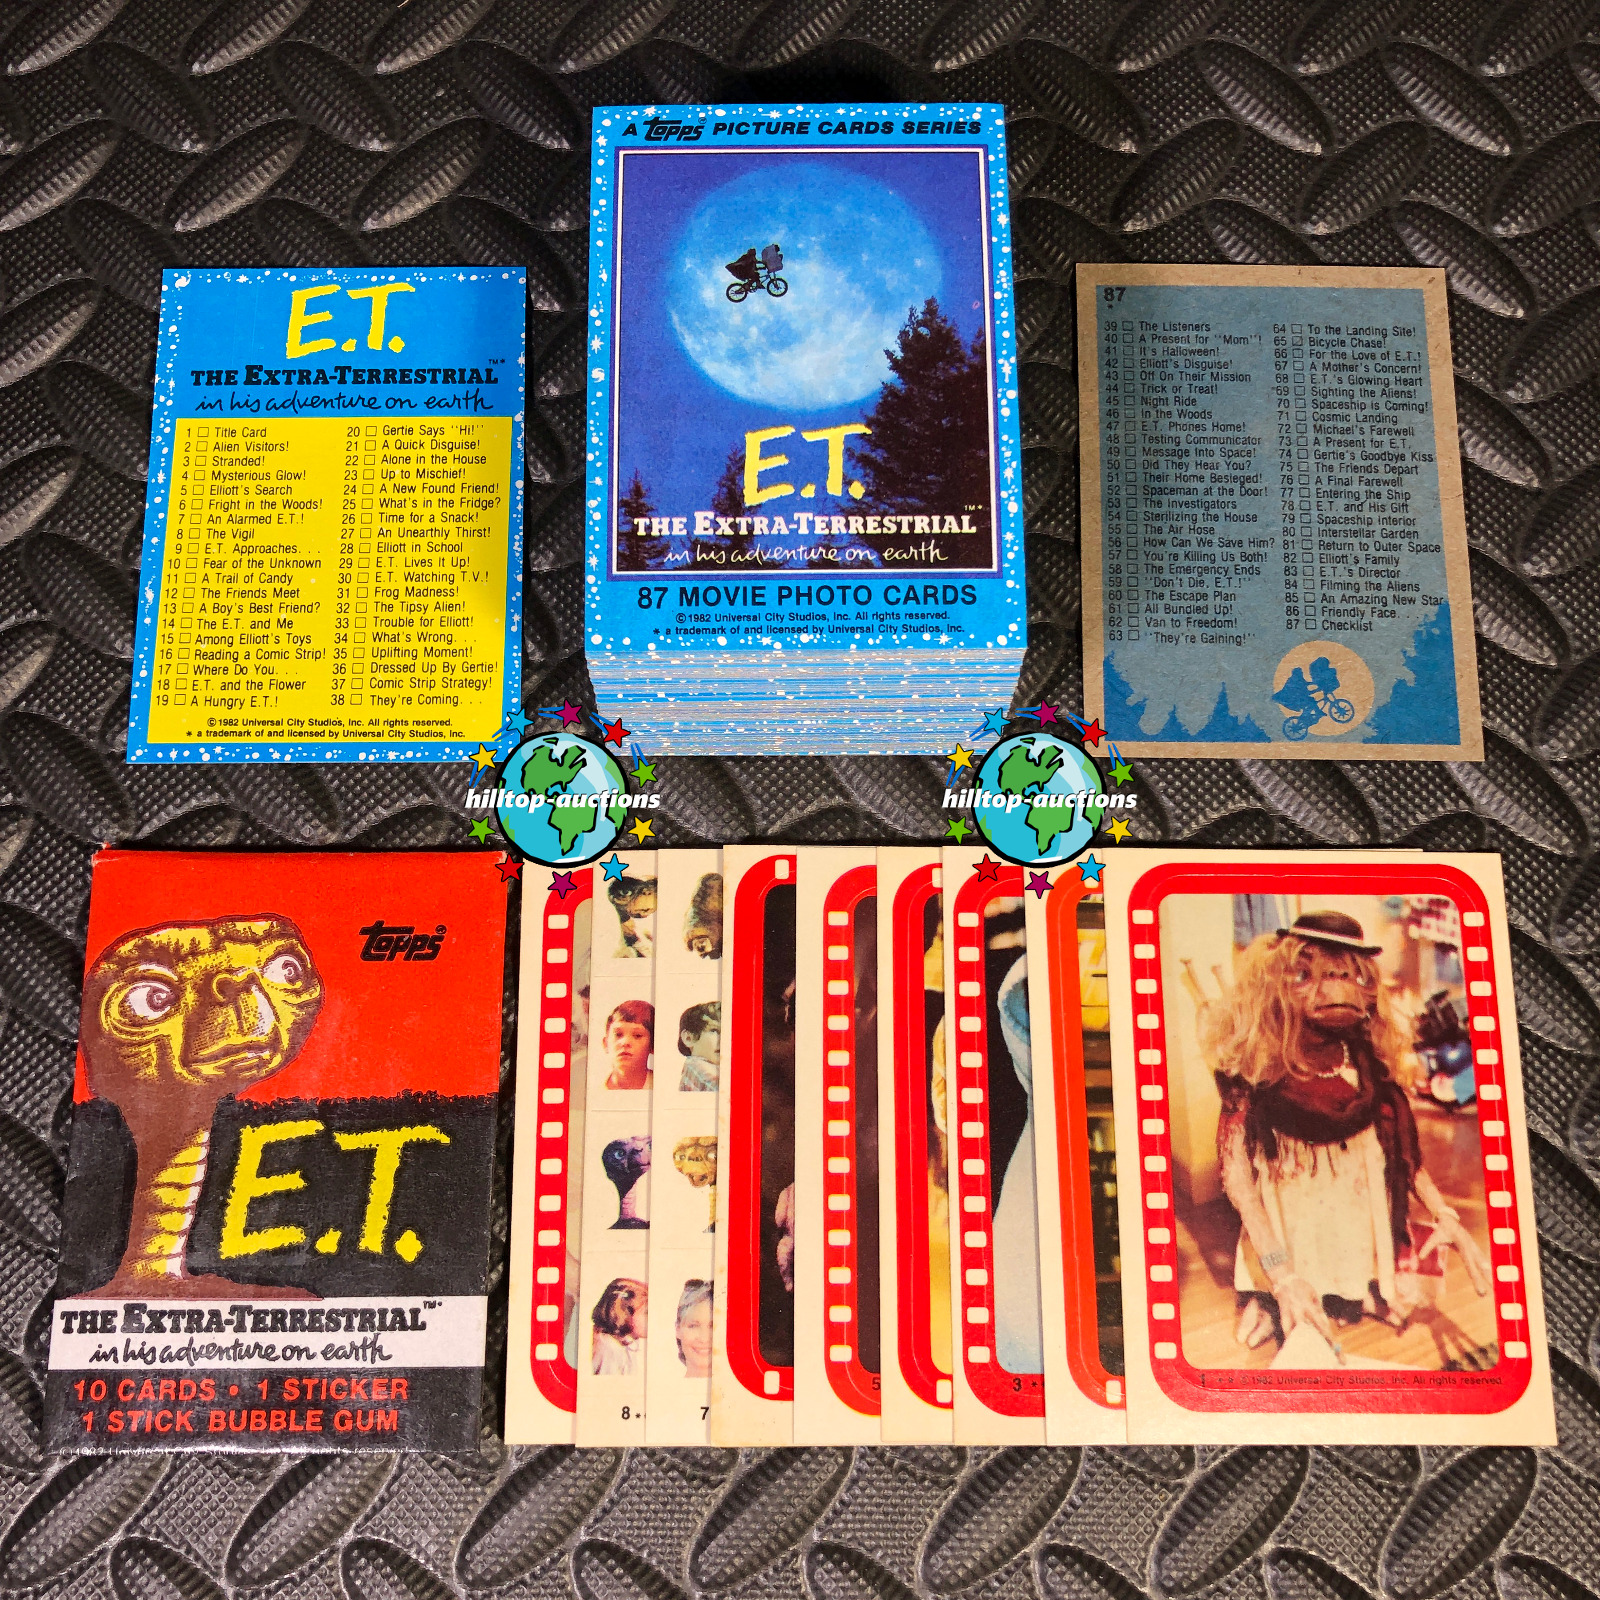 TOPPS 1982 E.T. EXTRA-TERRESTRIAL COMPLETE 87-TRADING CARD/9-STICKER SET WRAPPER